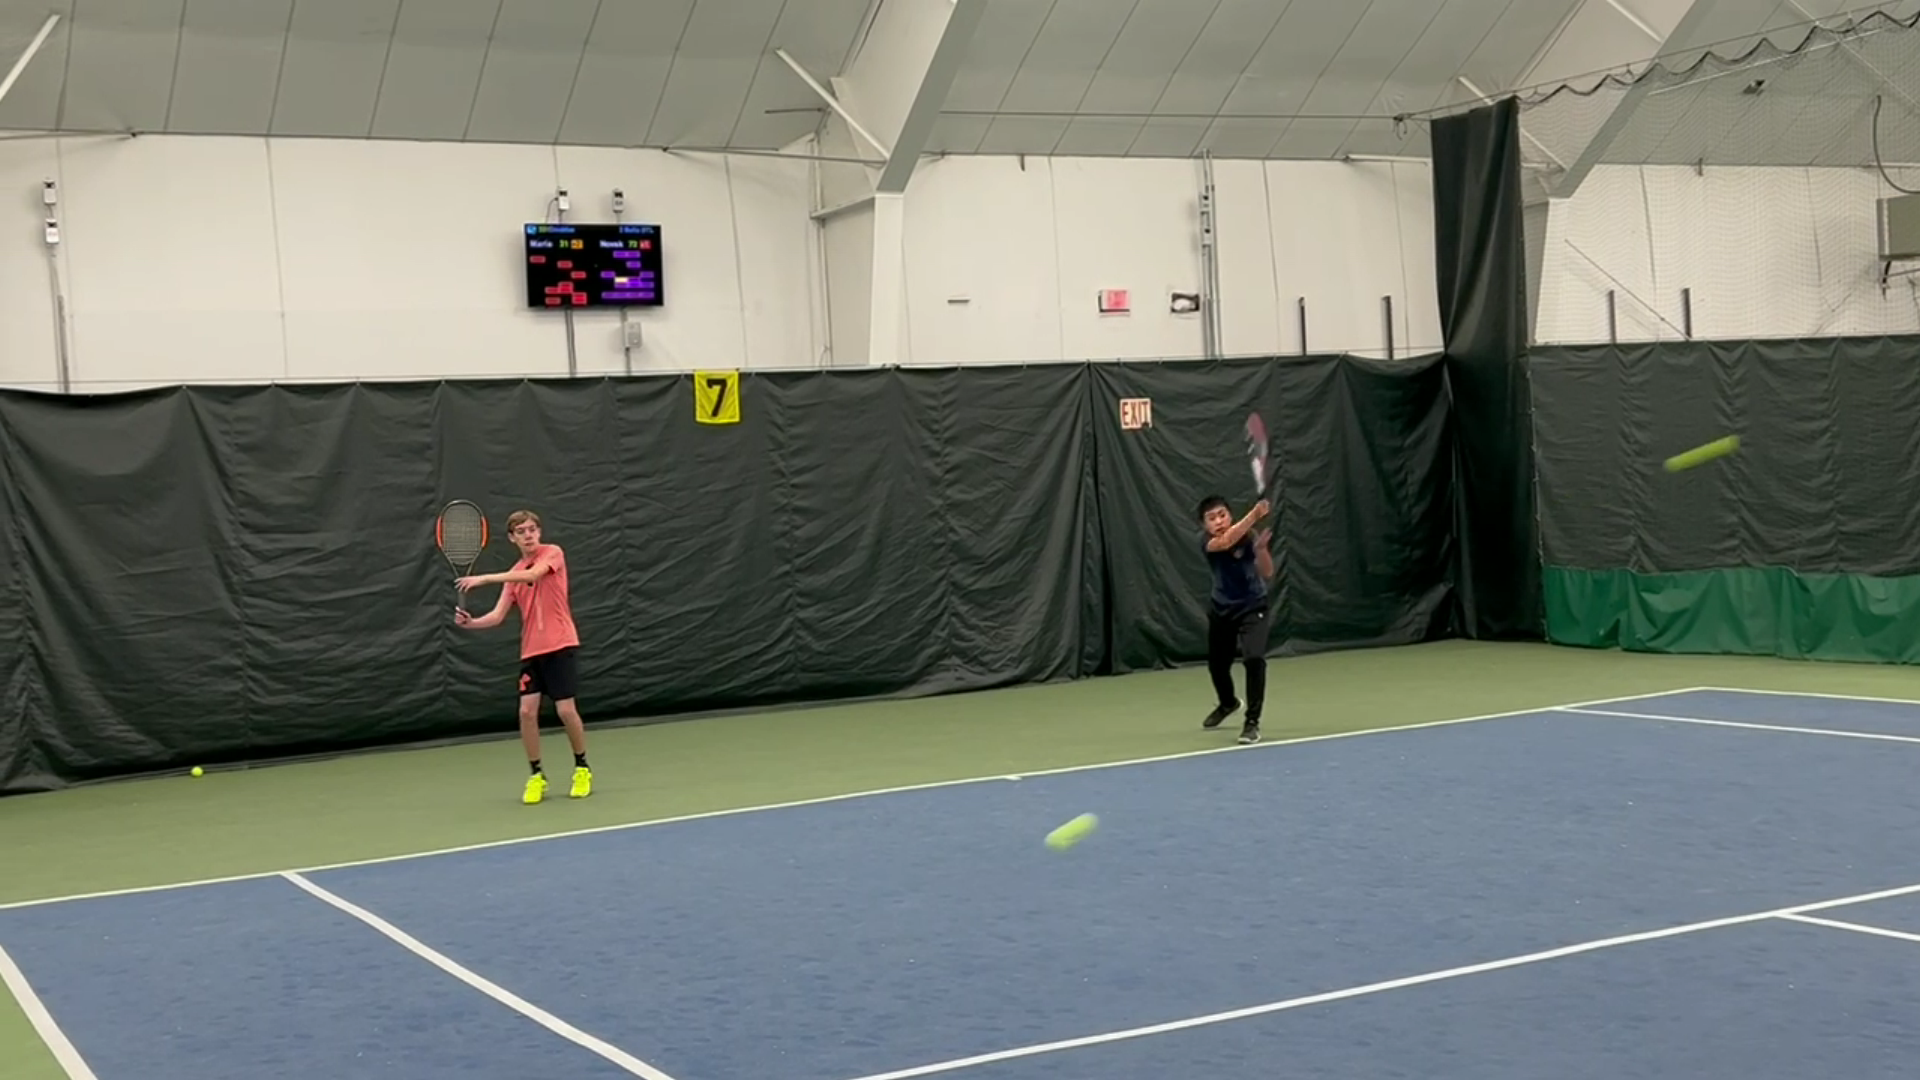 Junior tennis players compete in automated groundstroke drill on smart court